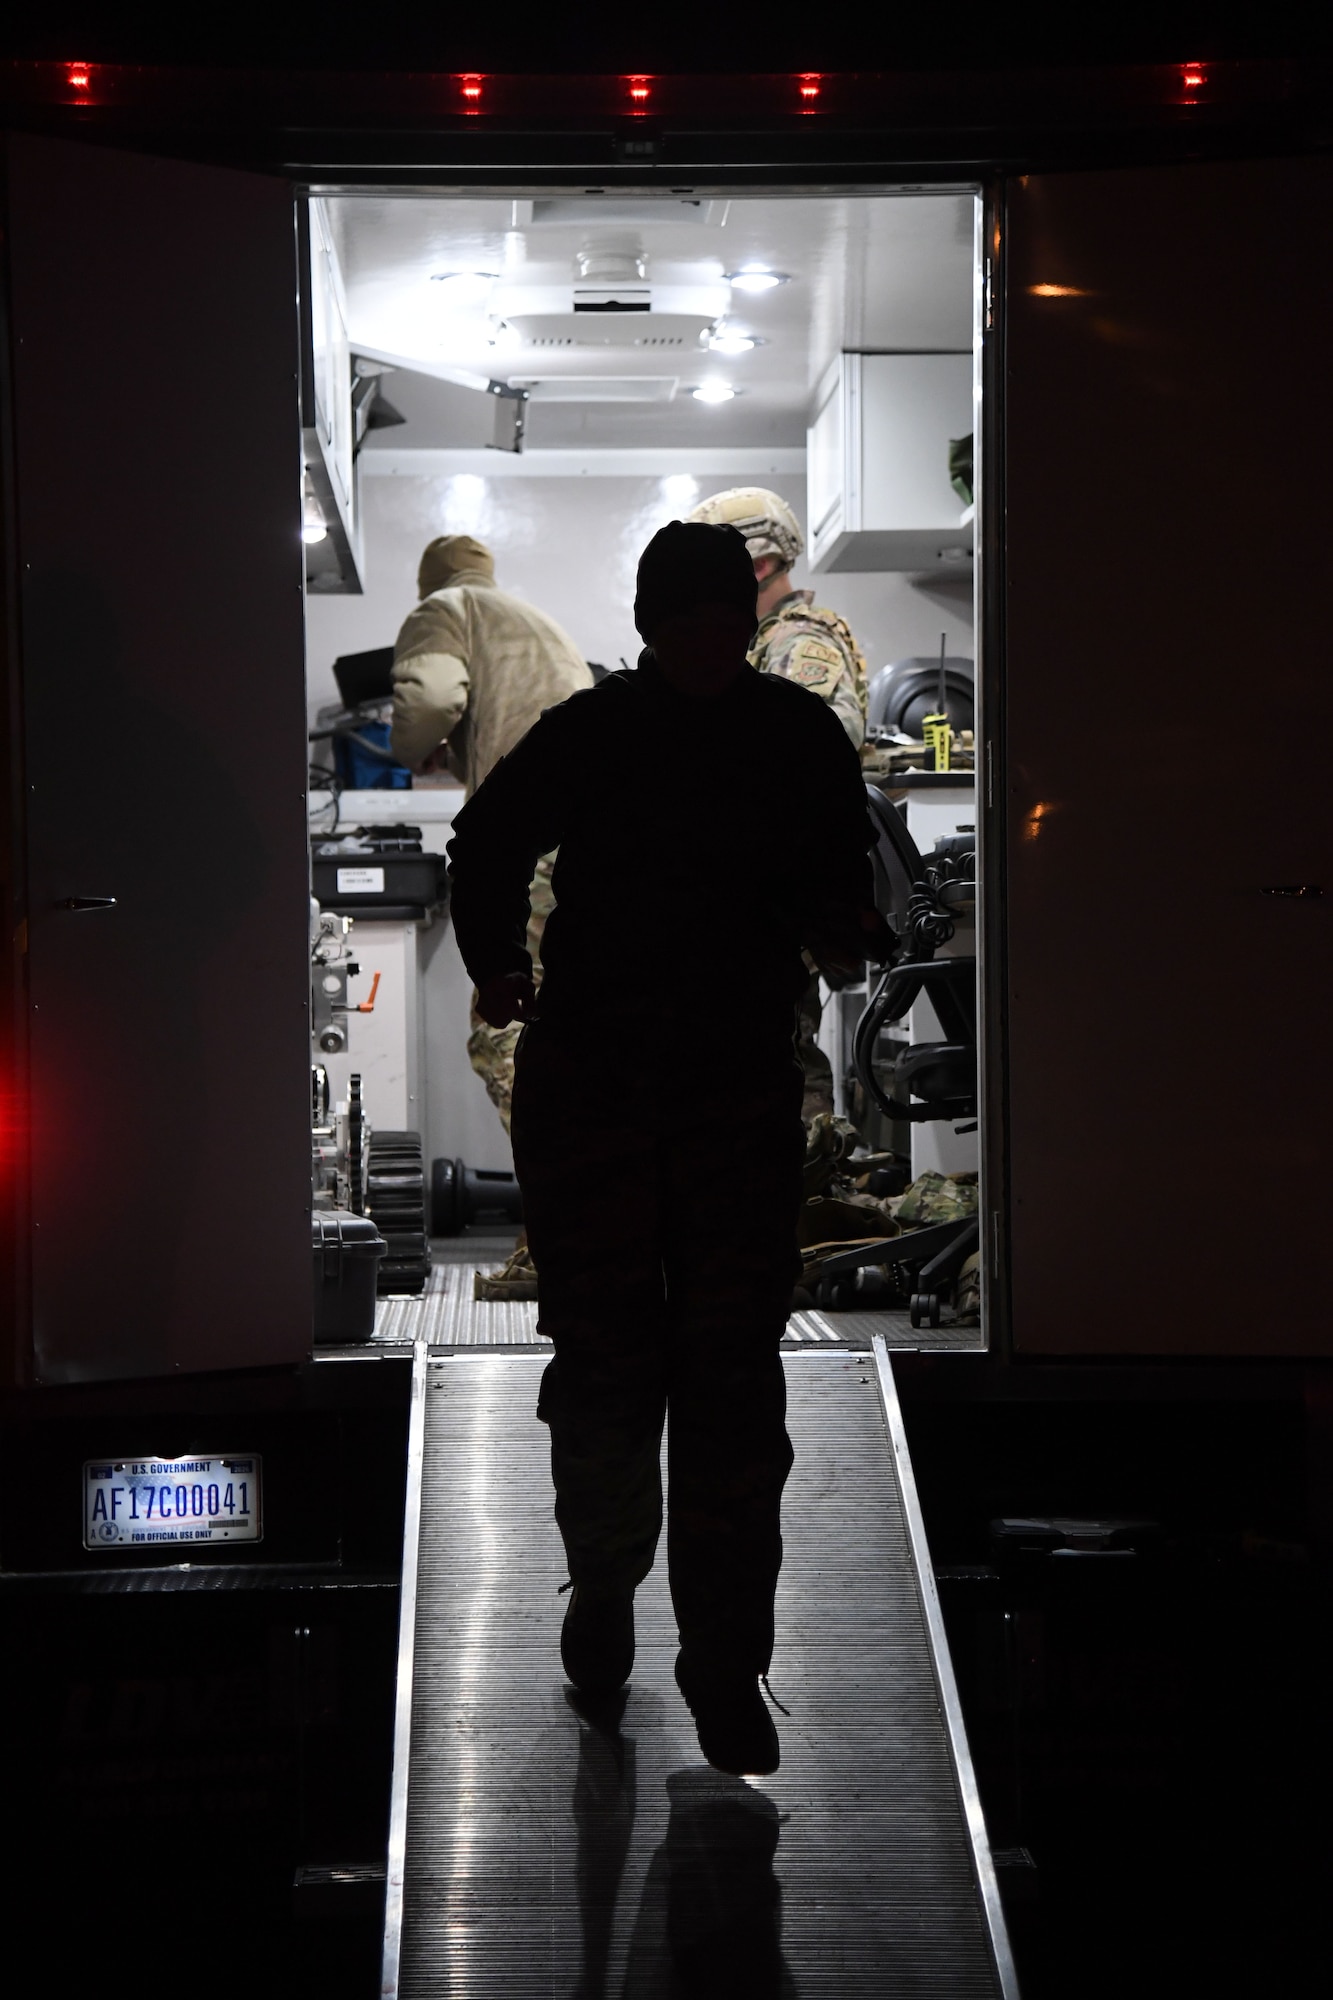 Senior Airman Rachel Zirkle, 436th Civil Engineer Squadron explosive ordnance disposal journeyman, exits a vehicle while responding to a suspicious package scenario during exercise Dover Operational Readiness for a Multi-domain Agile Response at Dover Air Force Base, Del., Nov. 13, 2019. DORMAR was a four-day exercise testing the installation’s ability to respond to various scenarios, including emergency response and rapid deployment. (U.S. Air Force photo by Senior Airman Eric M. Fisher)